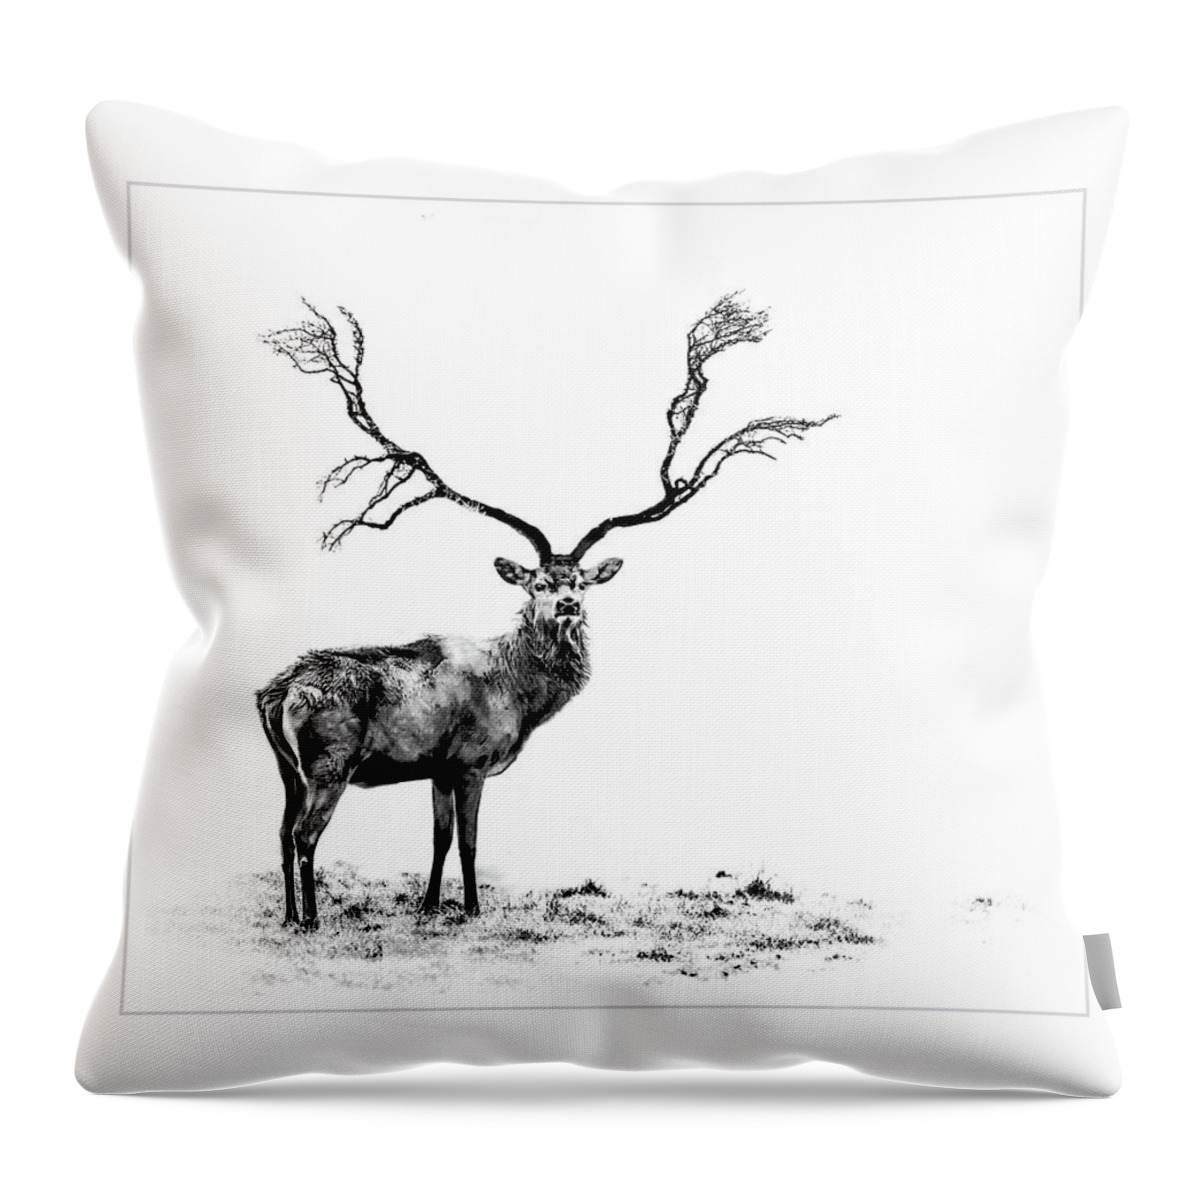 Stage Throw Pillow featuring the photograph The Stag by Andrea Kollo